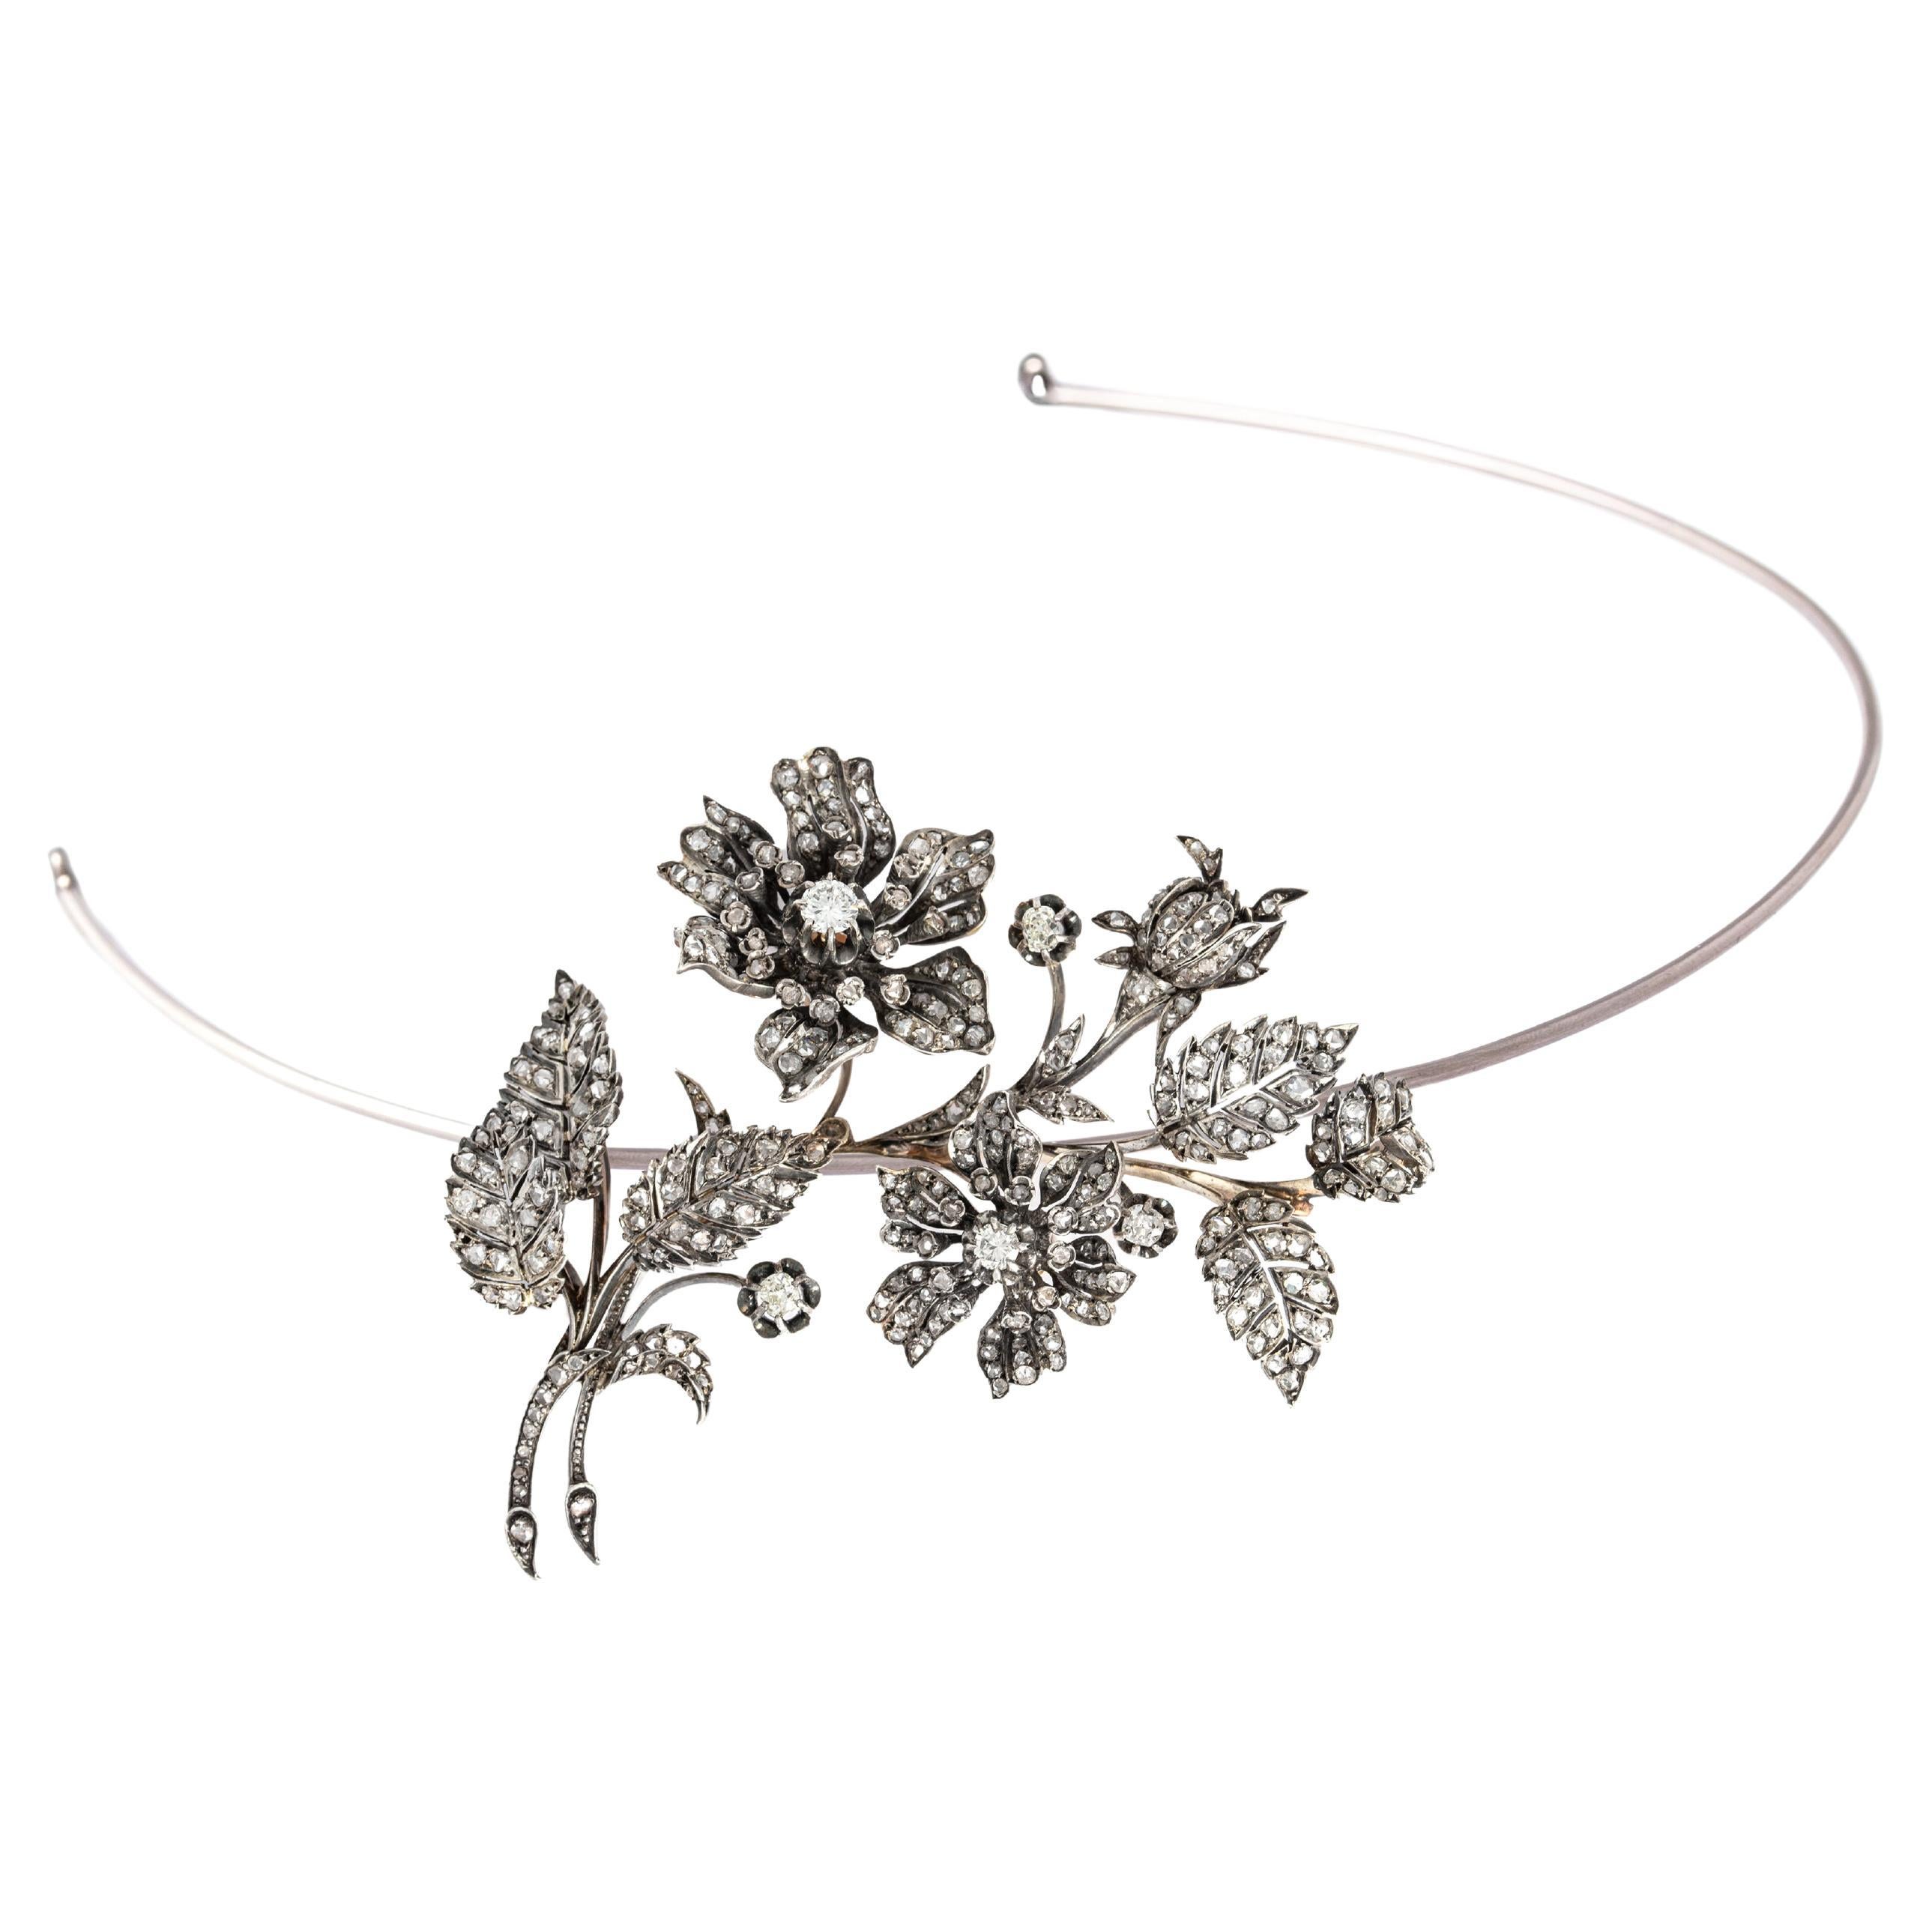 Antique Tiara convertible En Tremblant Flower Diamond Brooch on Silver and Gold.
French marks. 
Late 19th Century.

Tiara frame in titanium flexible and adaptable to all sizes.
Length: approximately 9.00 centimeters.
Width at maximum: approximately